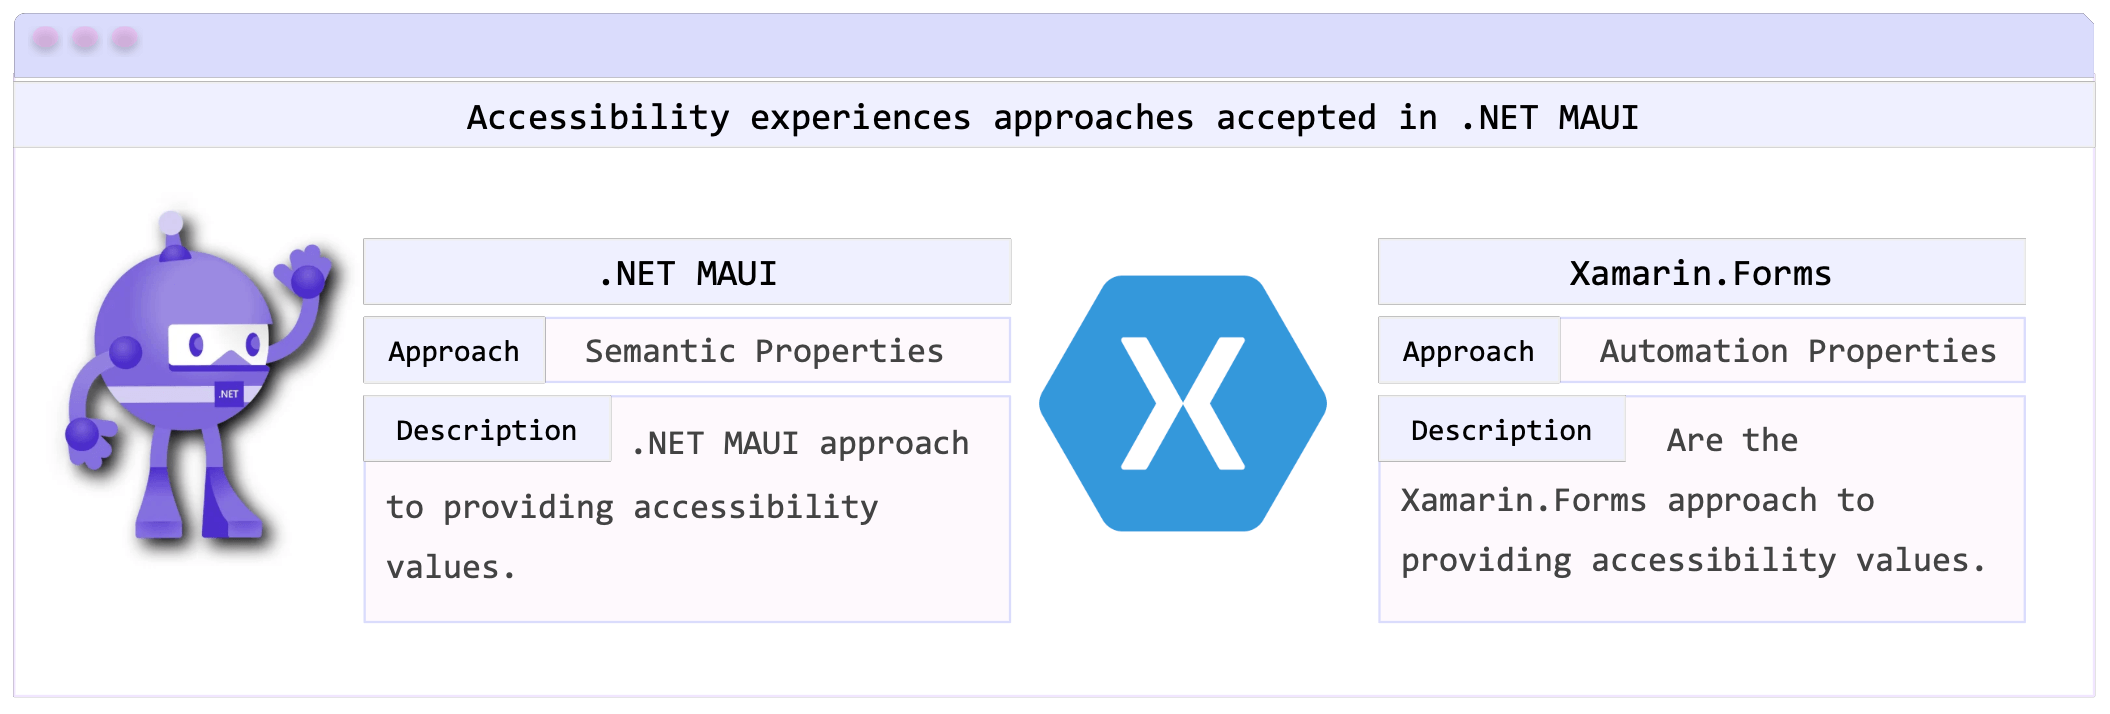 Accessibility experiences approaches accepted in .NET MAUI: .NET MAUI - Approach: Semantic Properties, Description: .NET MAUI approach to providing accessibility values. -- Xamarin.Forms - Approach: Automation Properties, Description: Are the Xamarin.Forms approach to providing accessibility values.